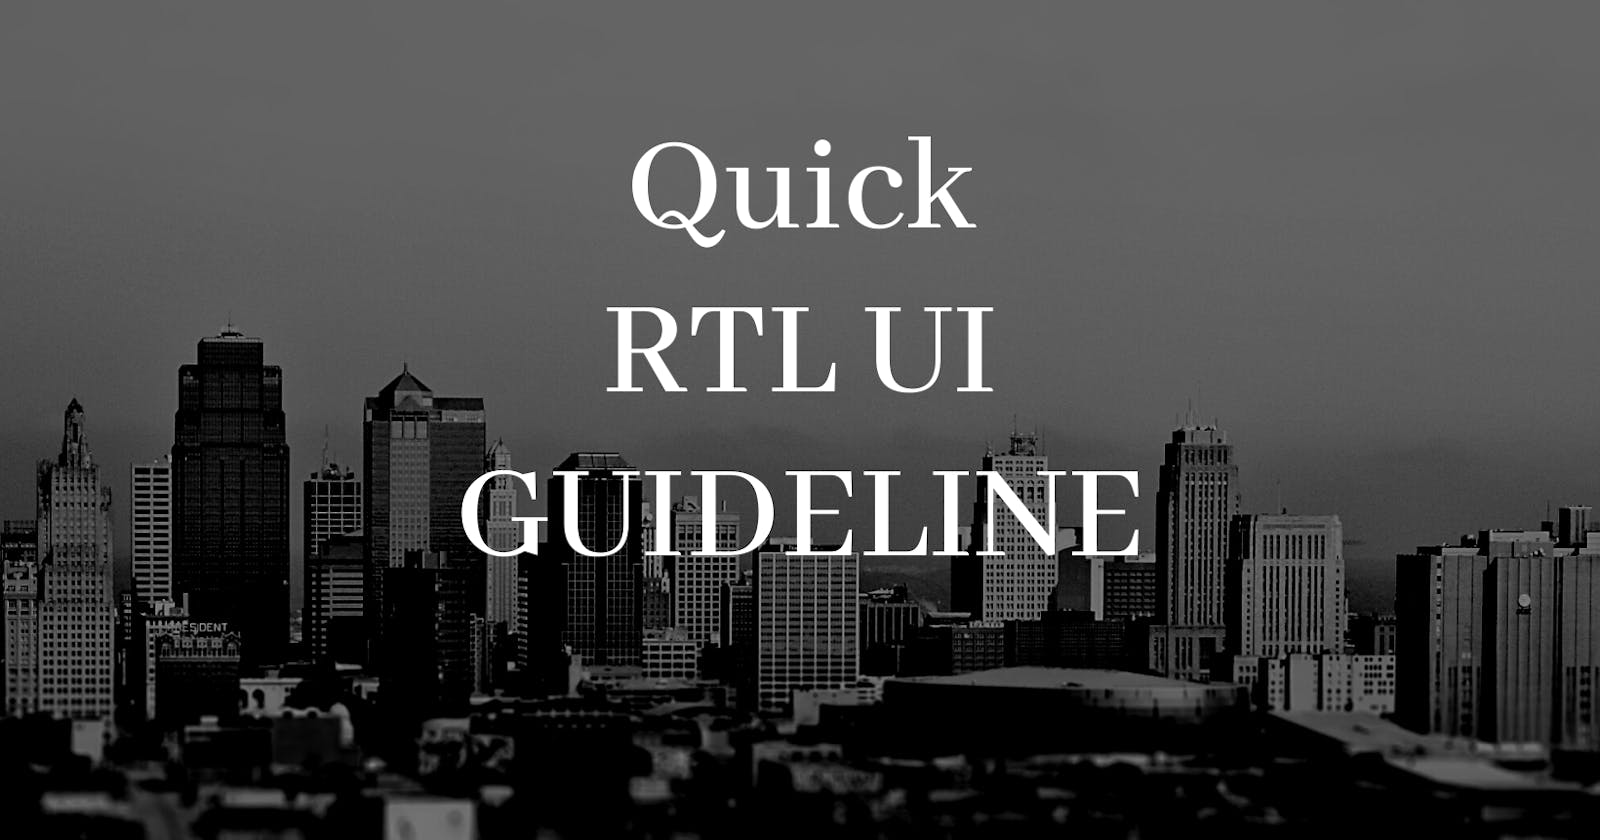 Quick guideline for RTL UI